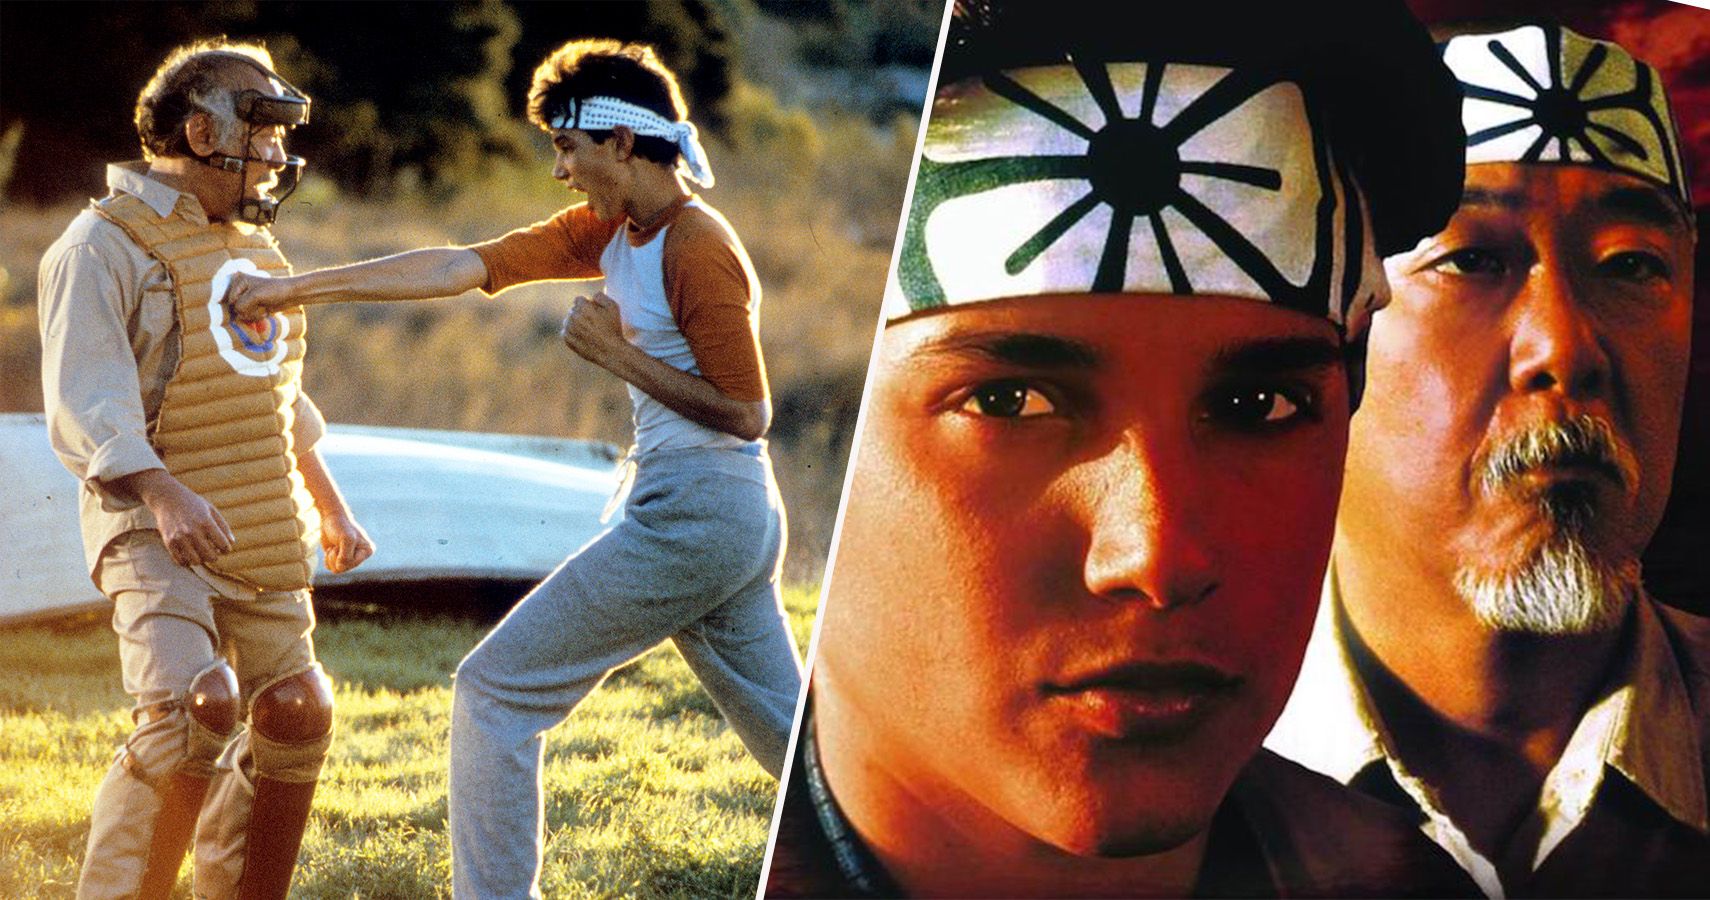 20 Wild Details Behind The Making Of The Karate Kid